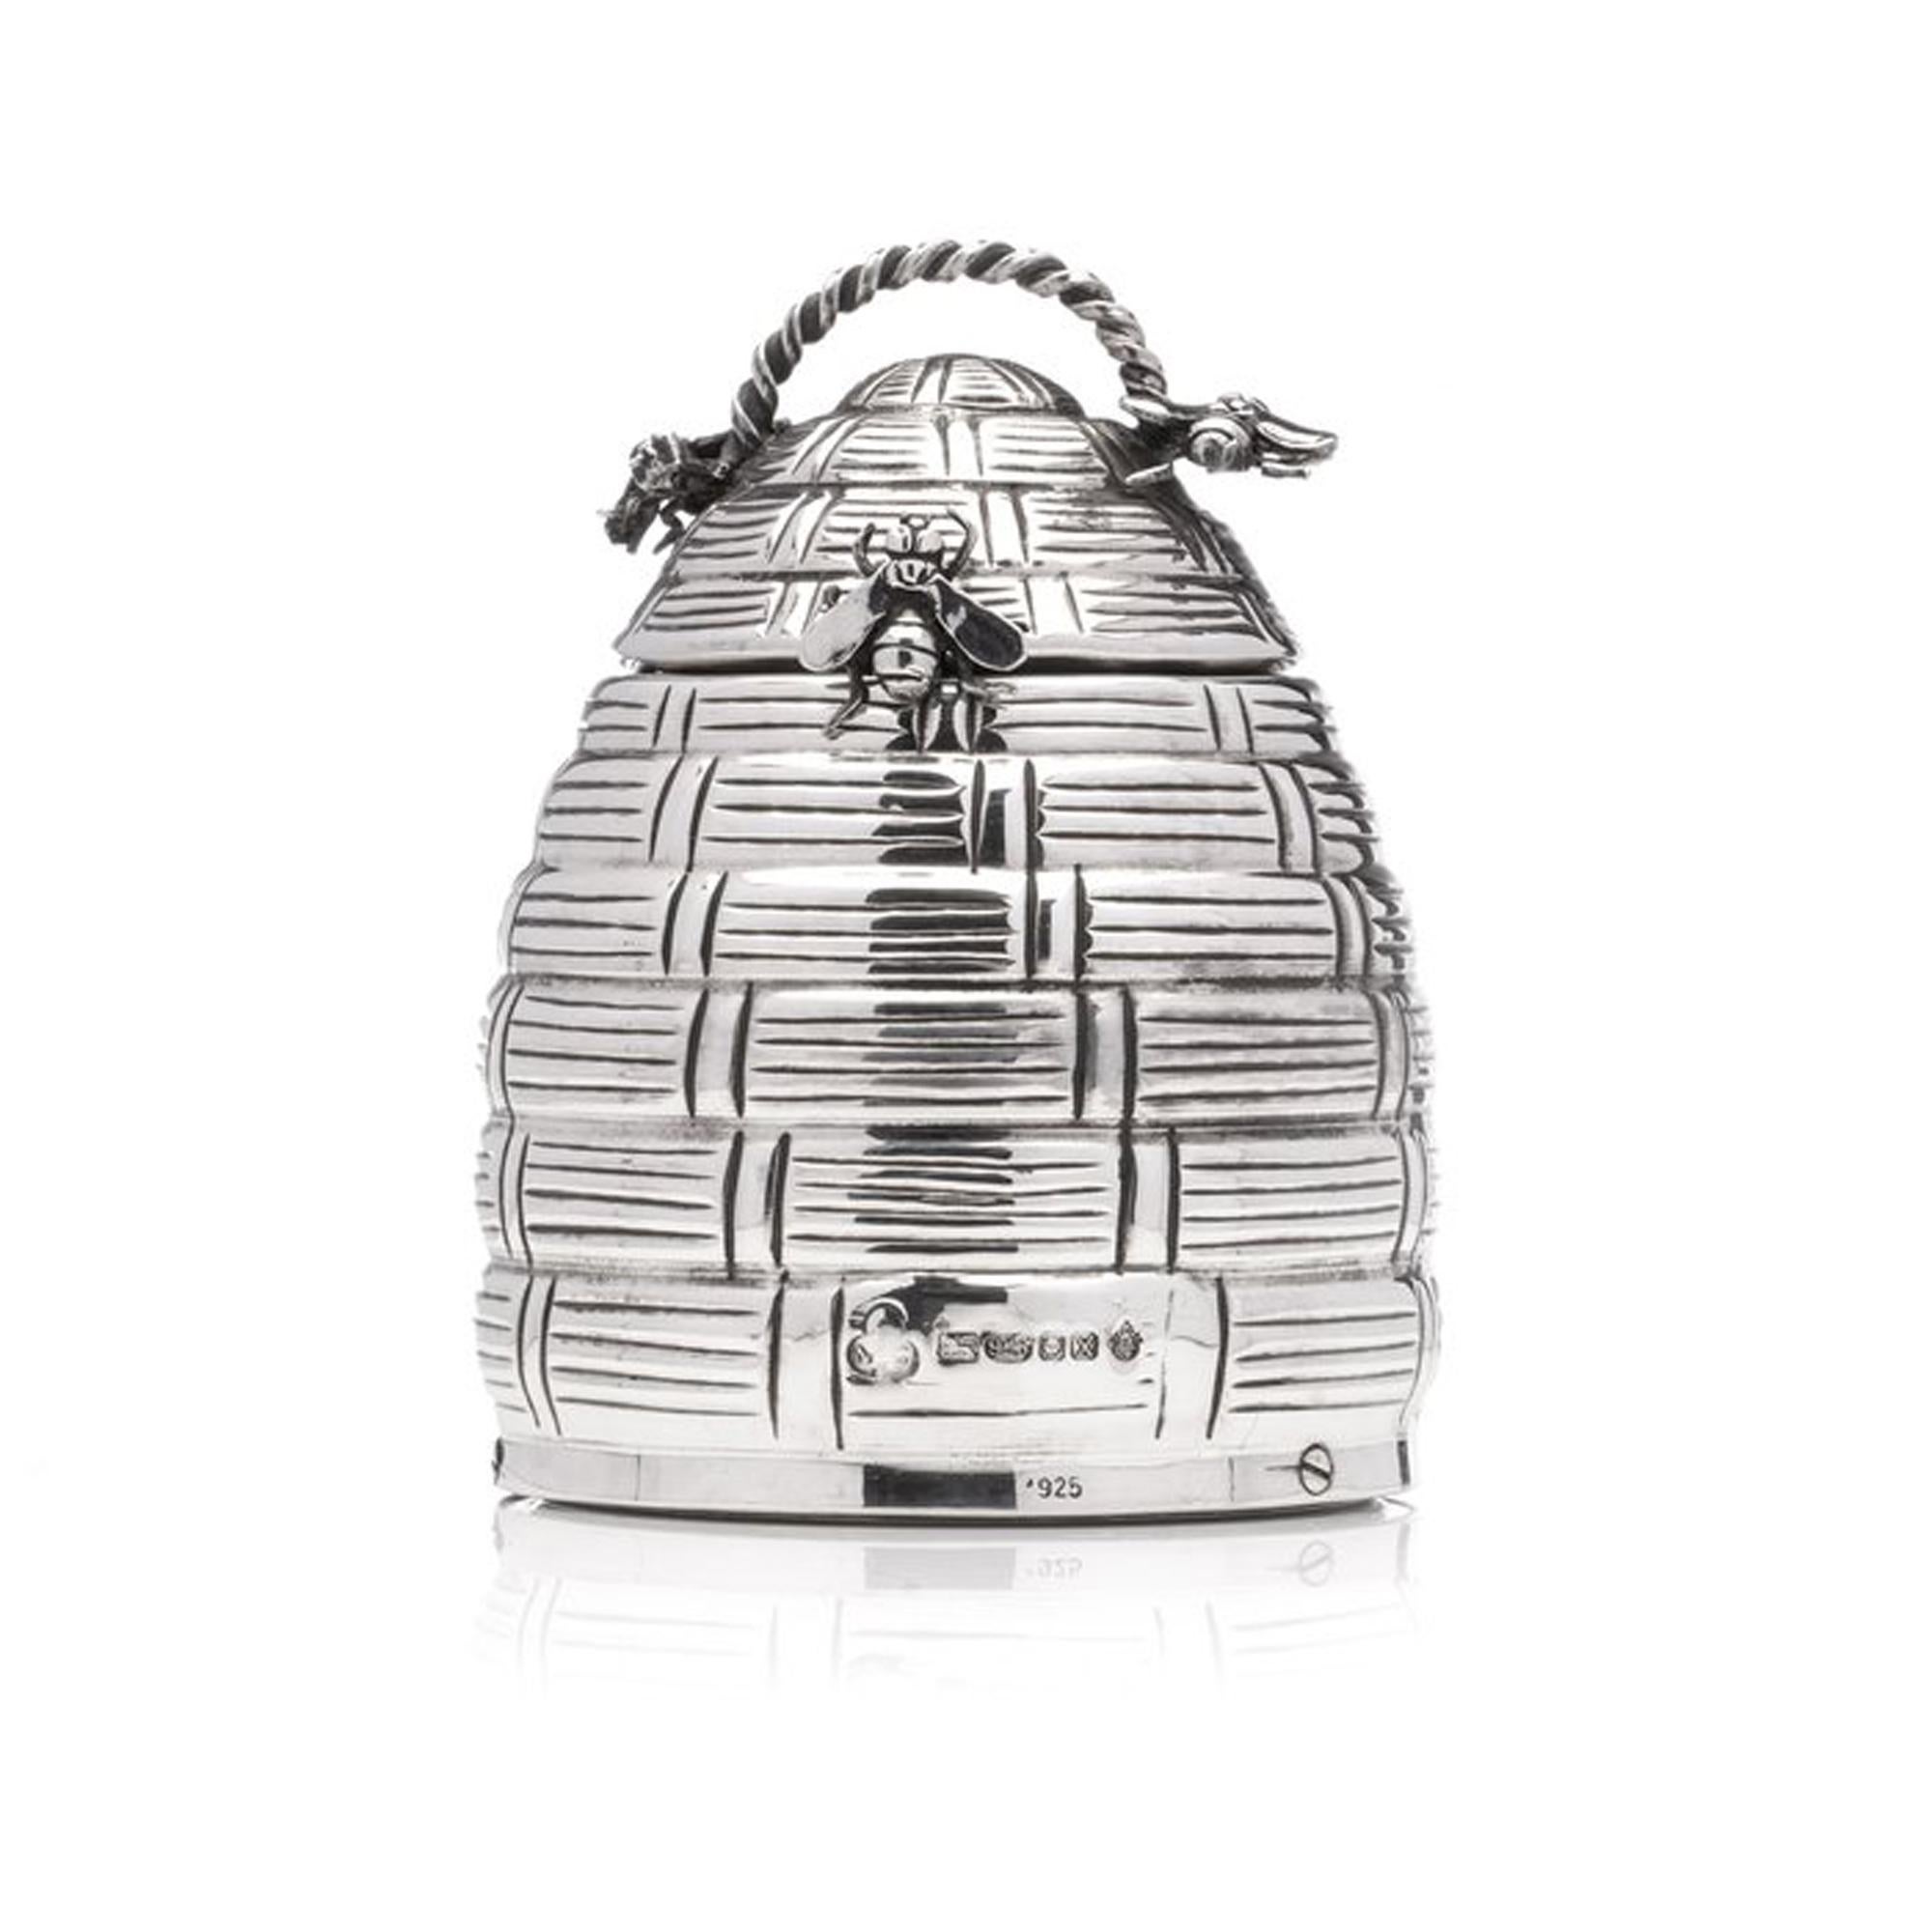 British Sterling 925 silver beehive honey pot with a spoon For Sale